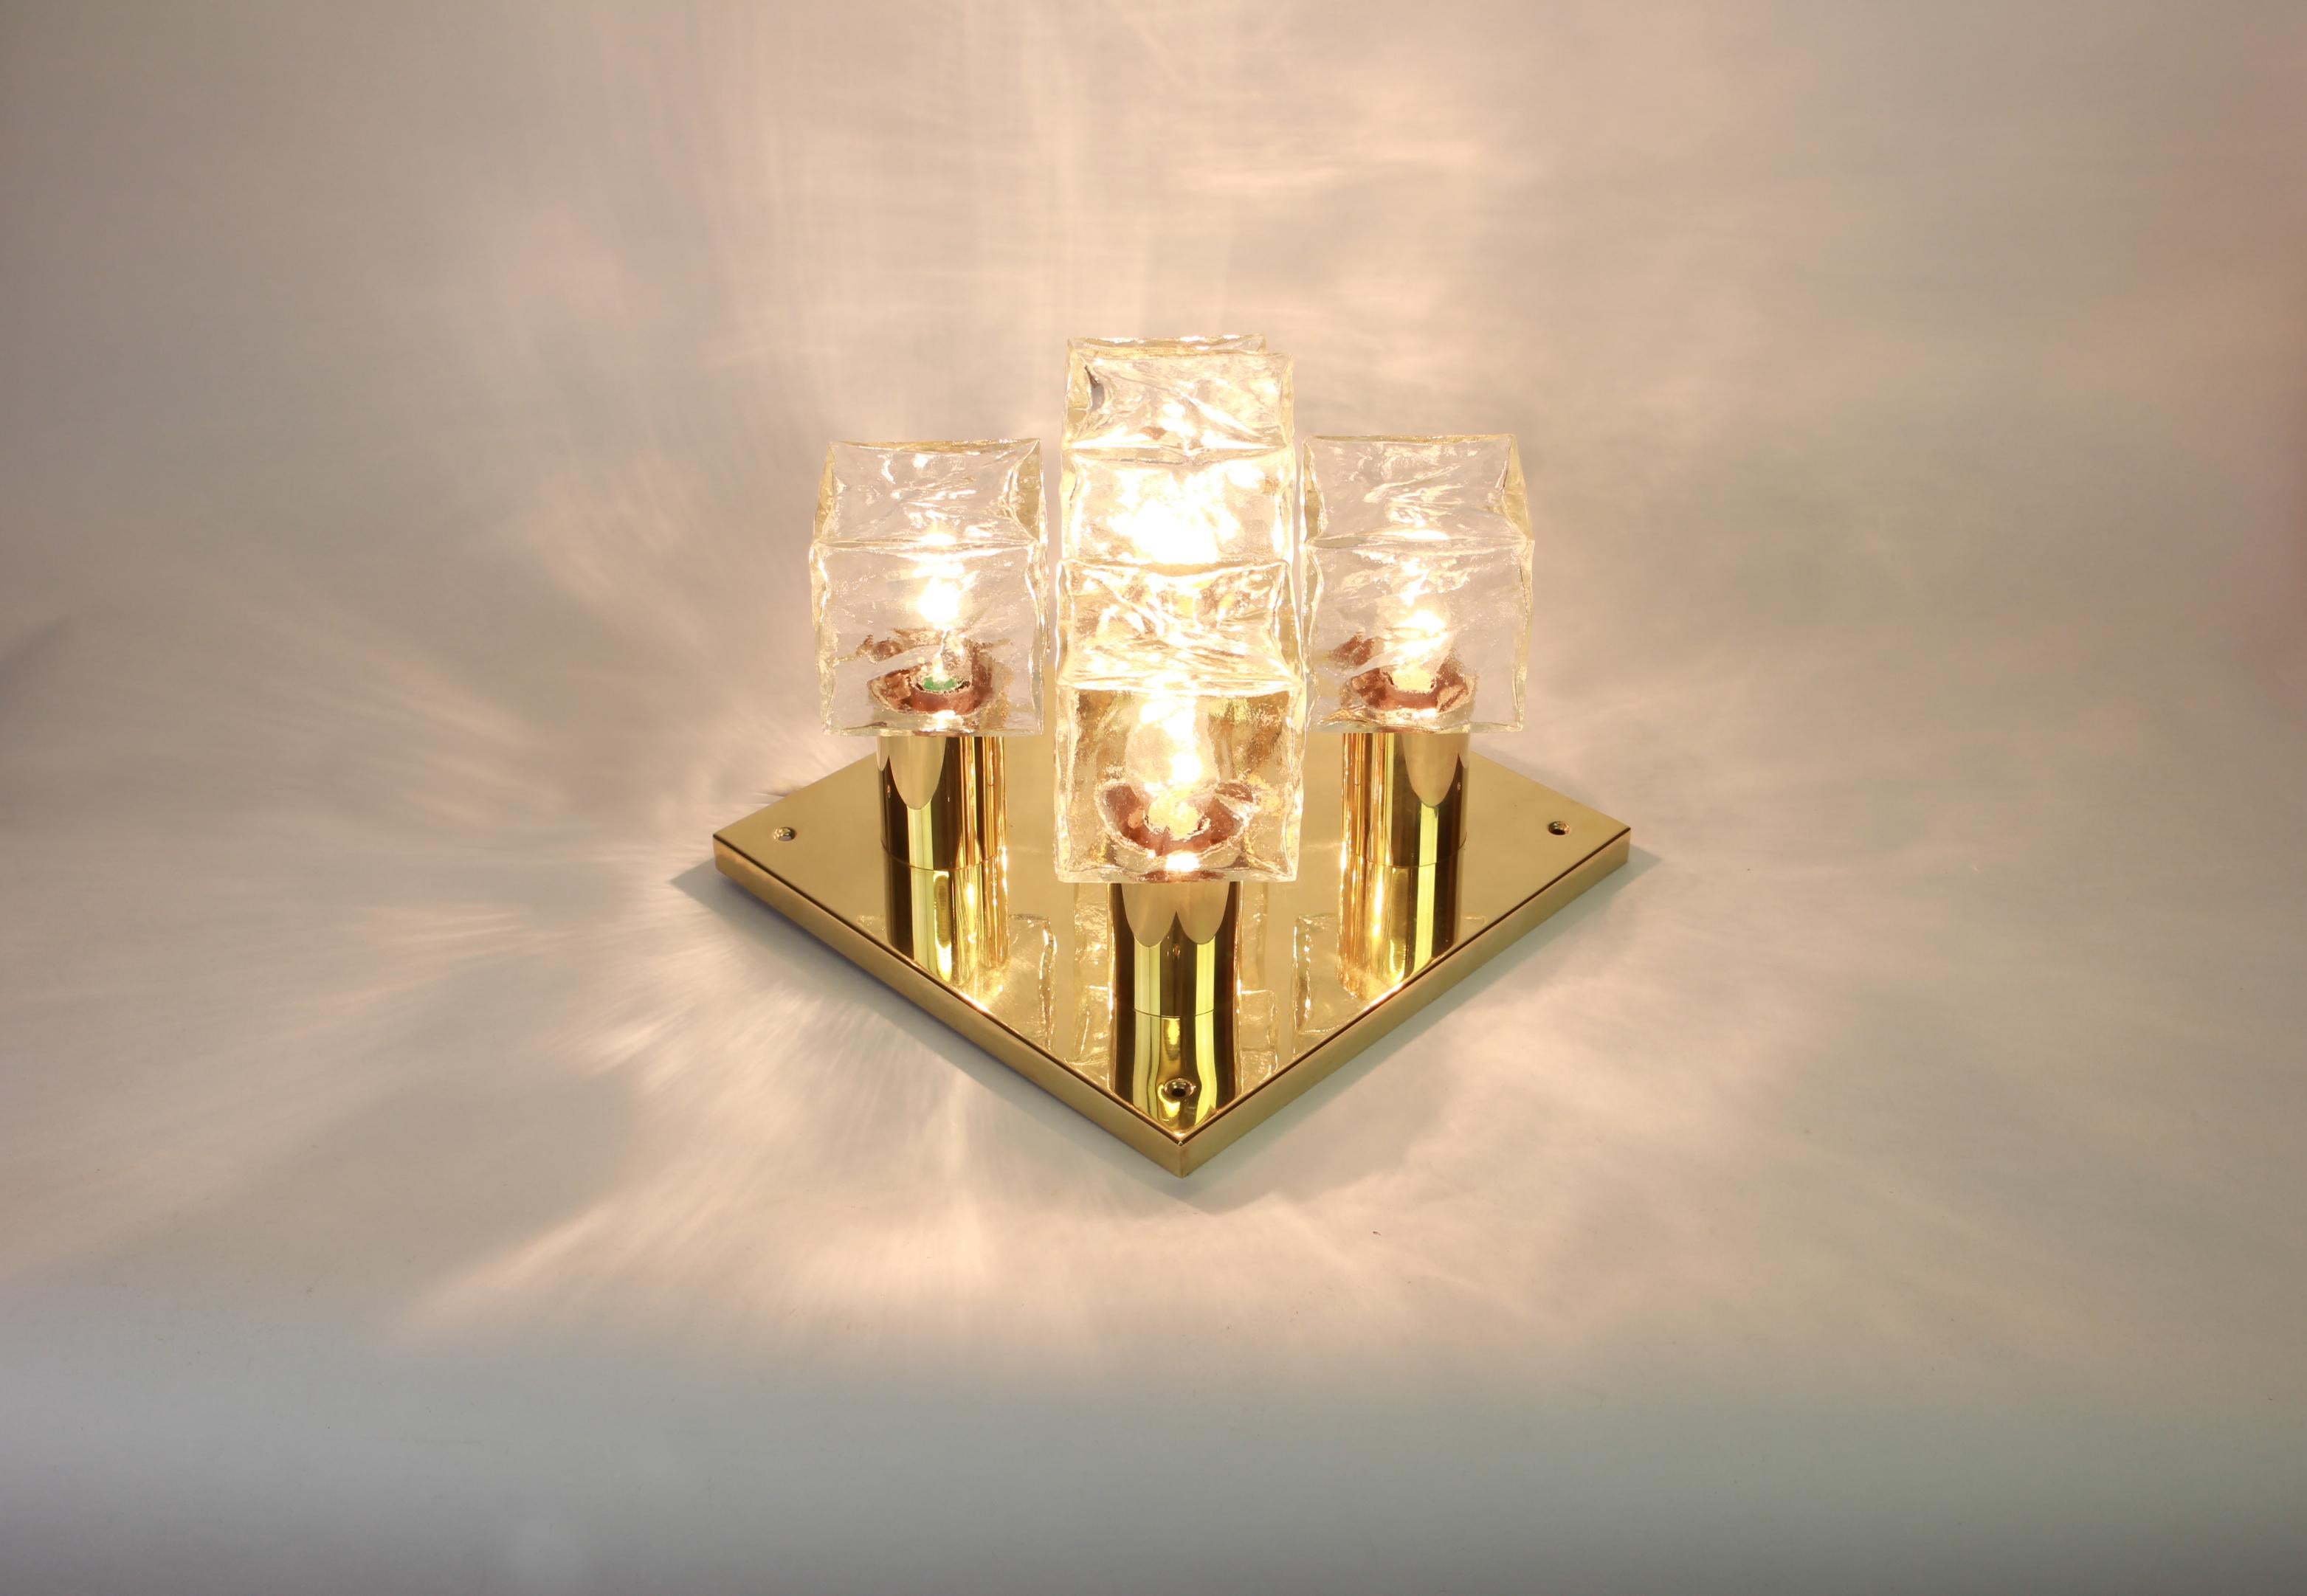 A stunning large flush mount by Kalmar, Austria, manufactured in the 1960s.
The flush mount is composed of a 5 thick textured ice glass elements attached to a brass metal frame.
Wonderful lights effect.

Heavy quality and in very good condition.